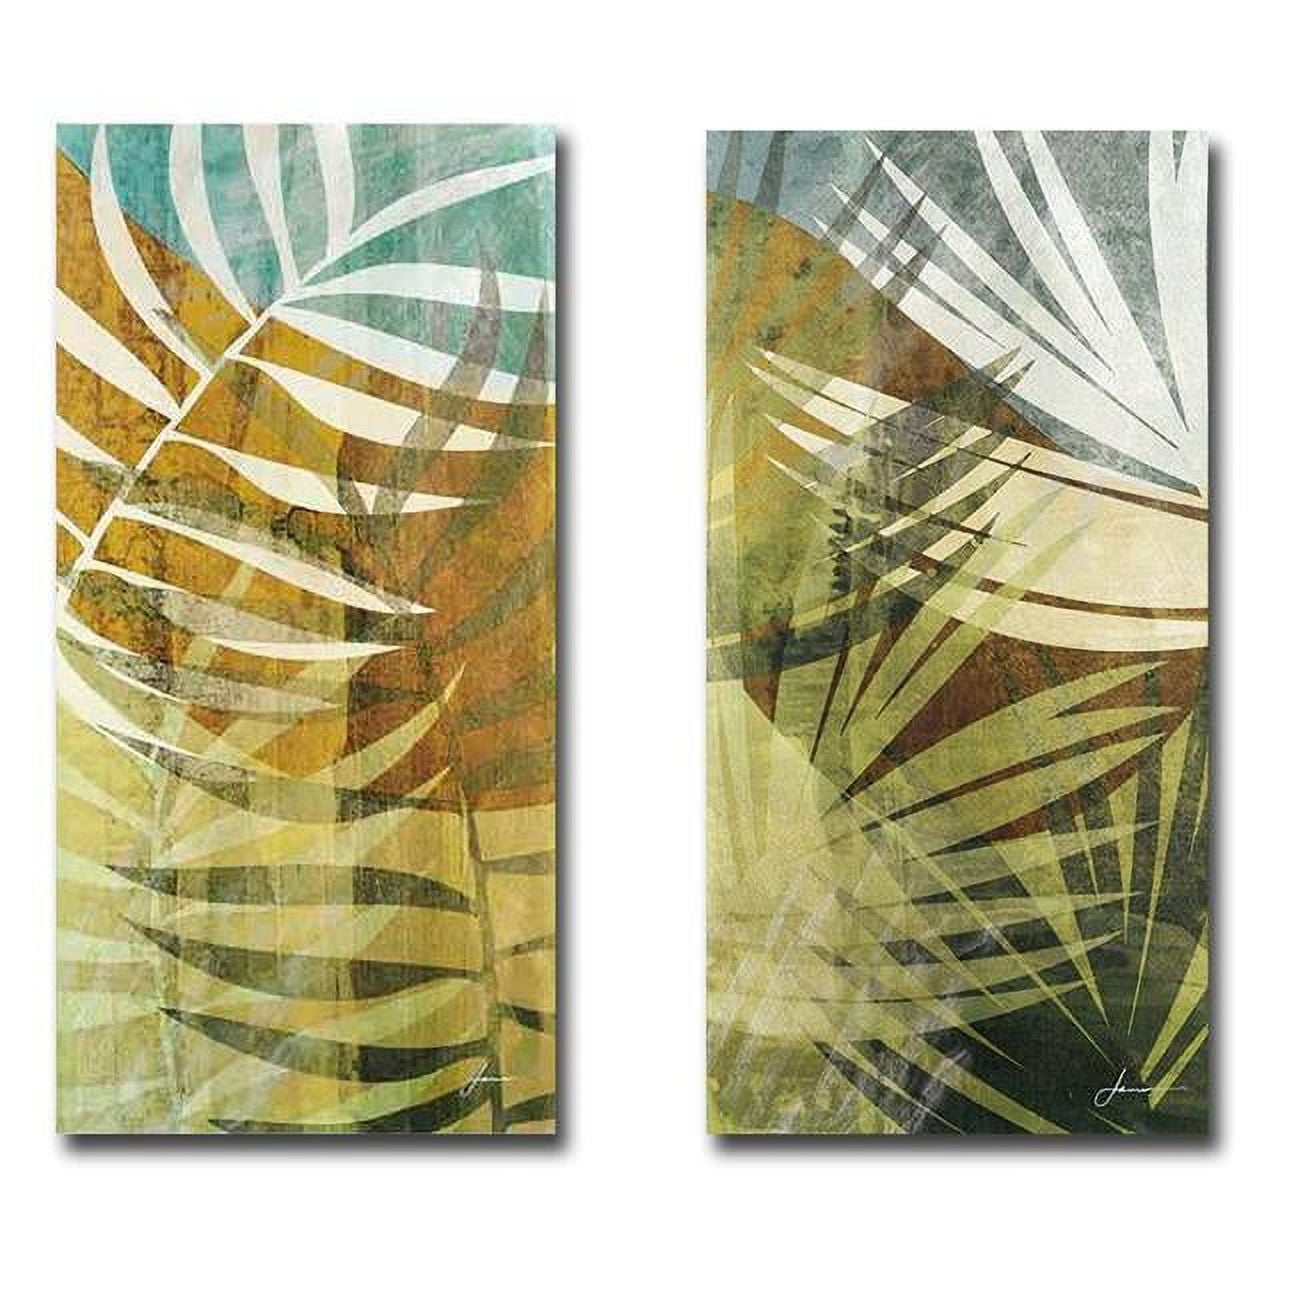 1224am849eg Palm Frond I & Ii By James Burghardt Premium Gallery Wrapped Canvas Giclee Art Set - Ready-to-hang, 12 X 24 X 1.5 In.